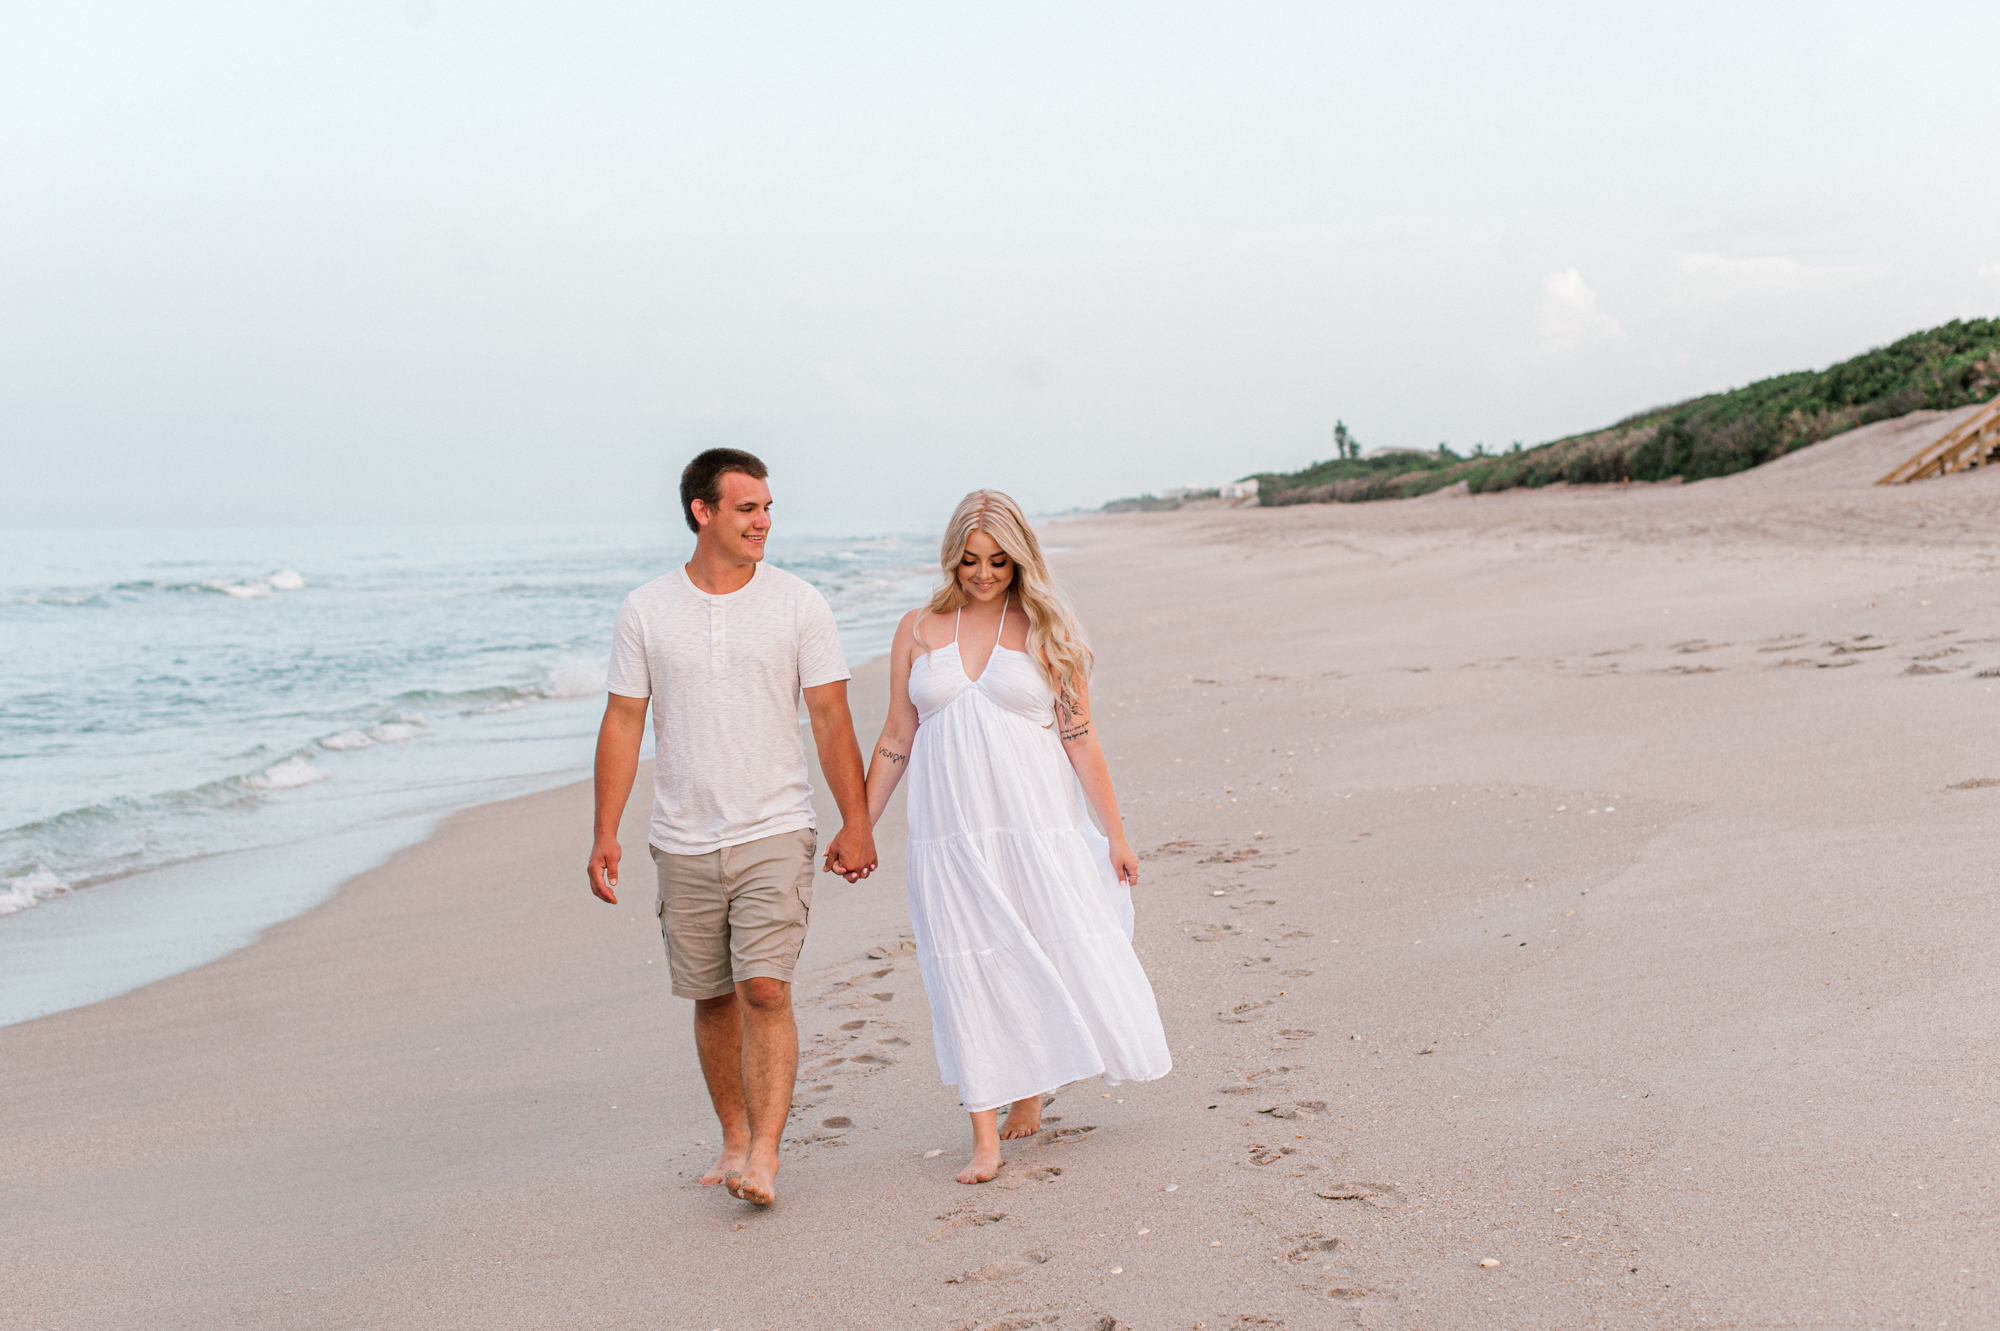 Newly engaged couple walking along the beach during their engagement session wearing neutral colors and holding hands.